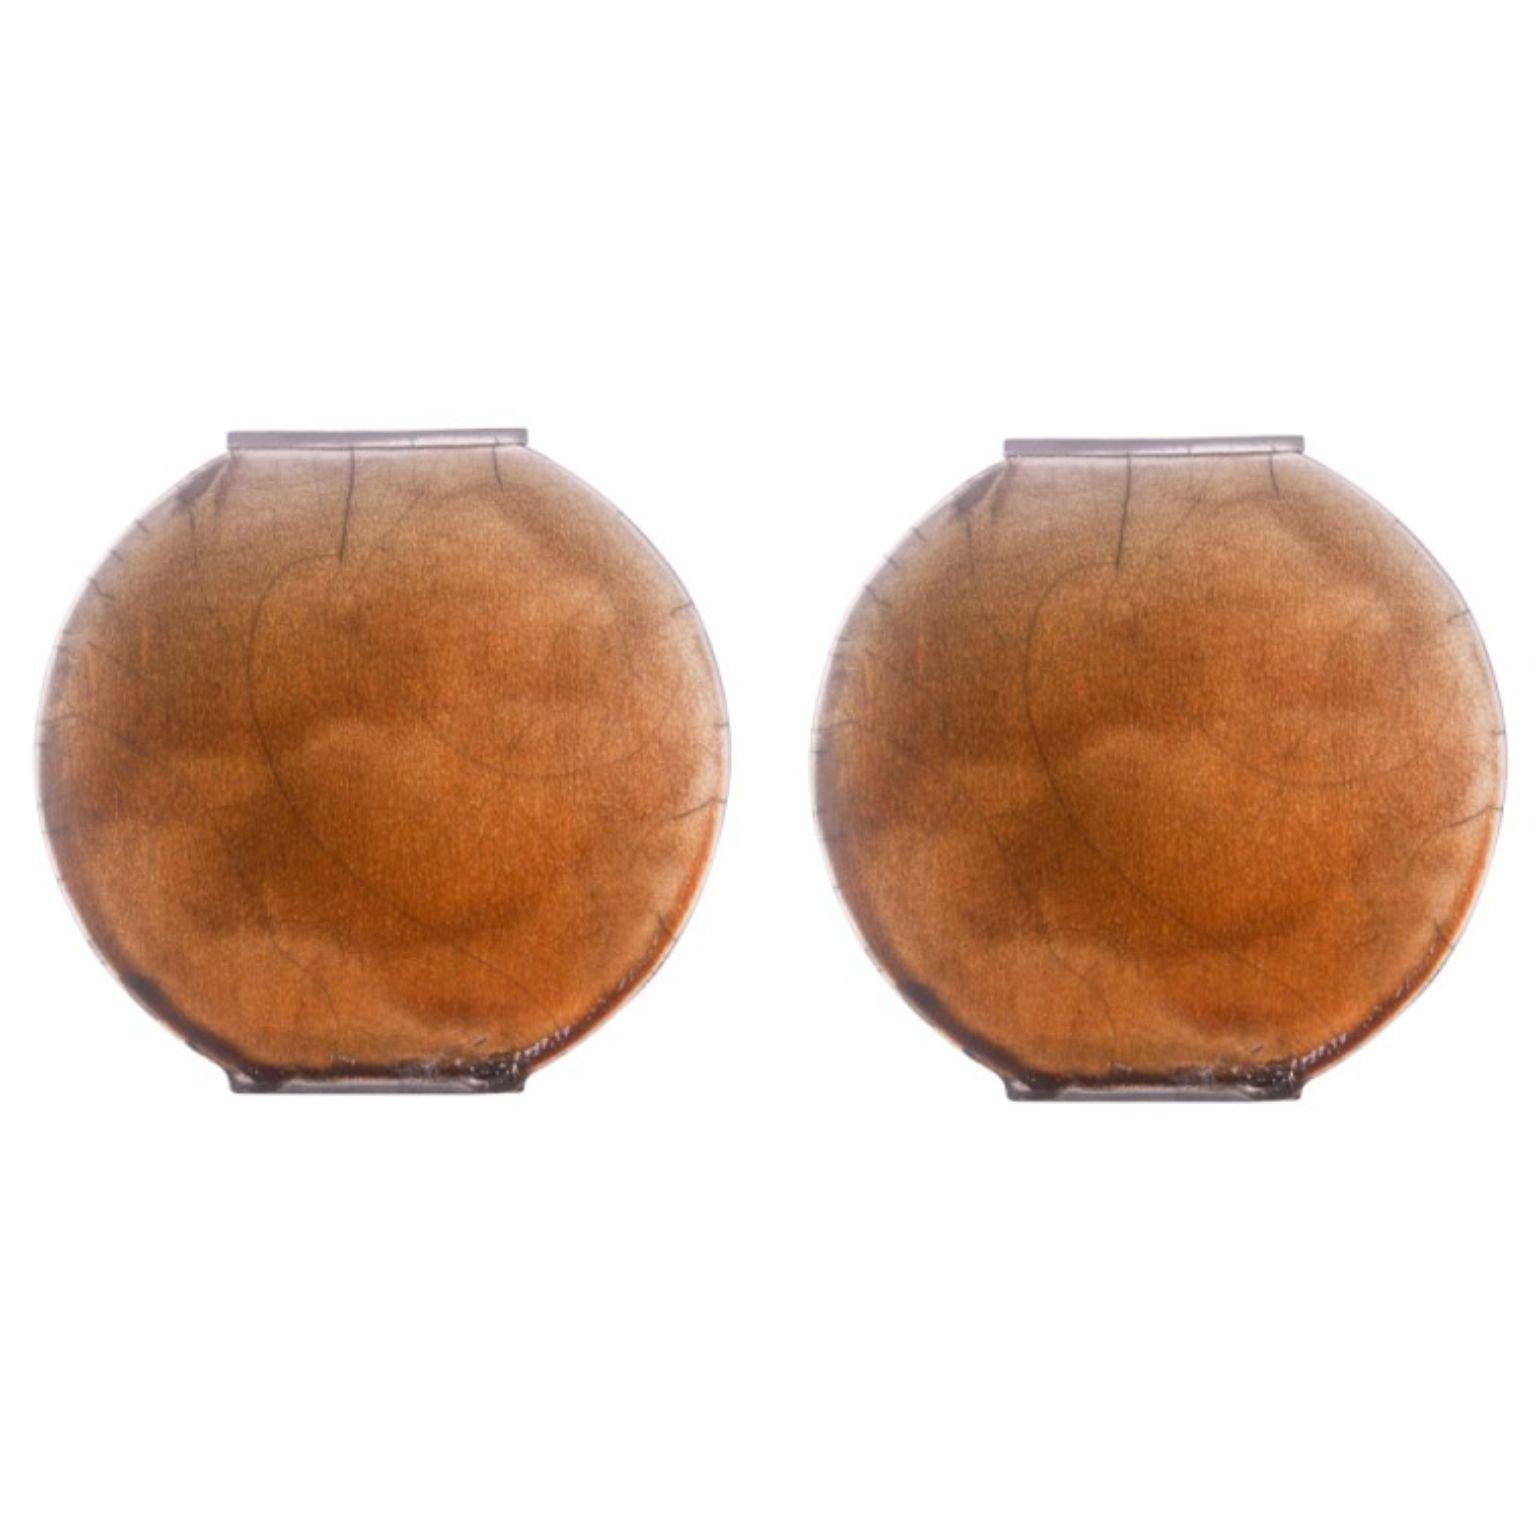 Set of 2 small amber vases by Doa Ceramics 
Dimensions: 3.5